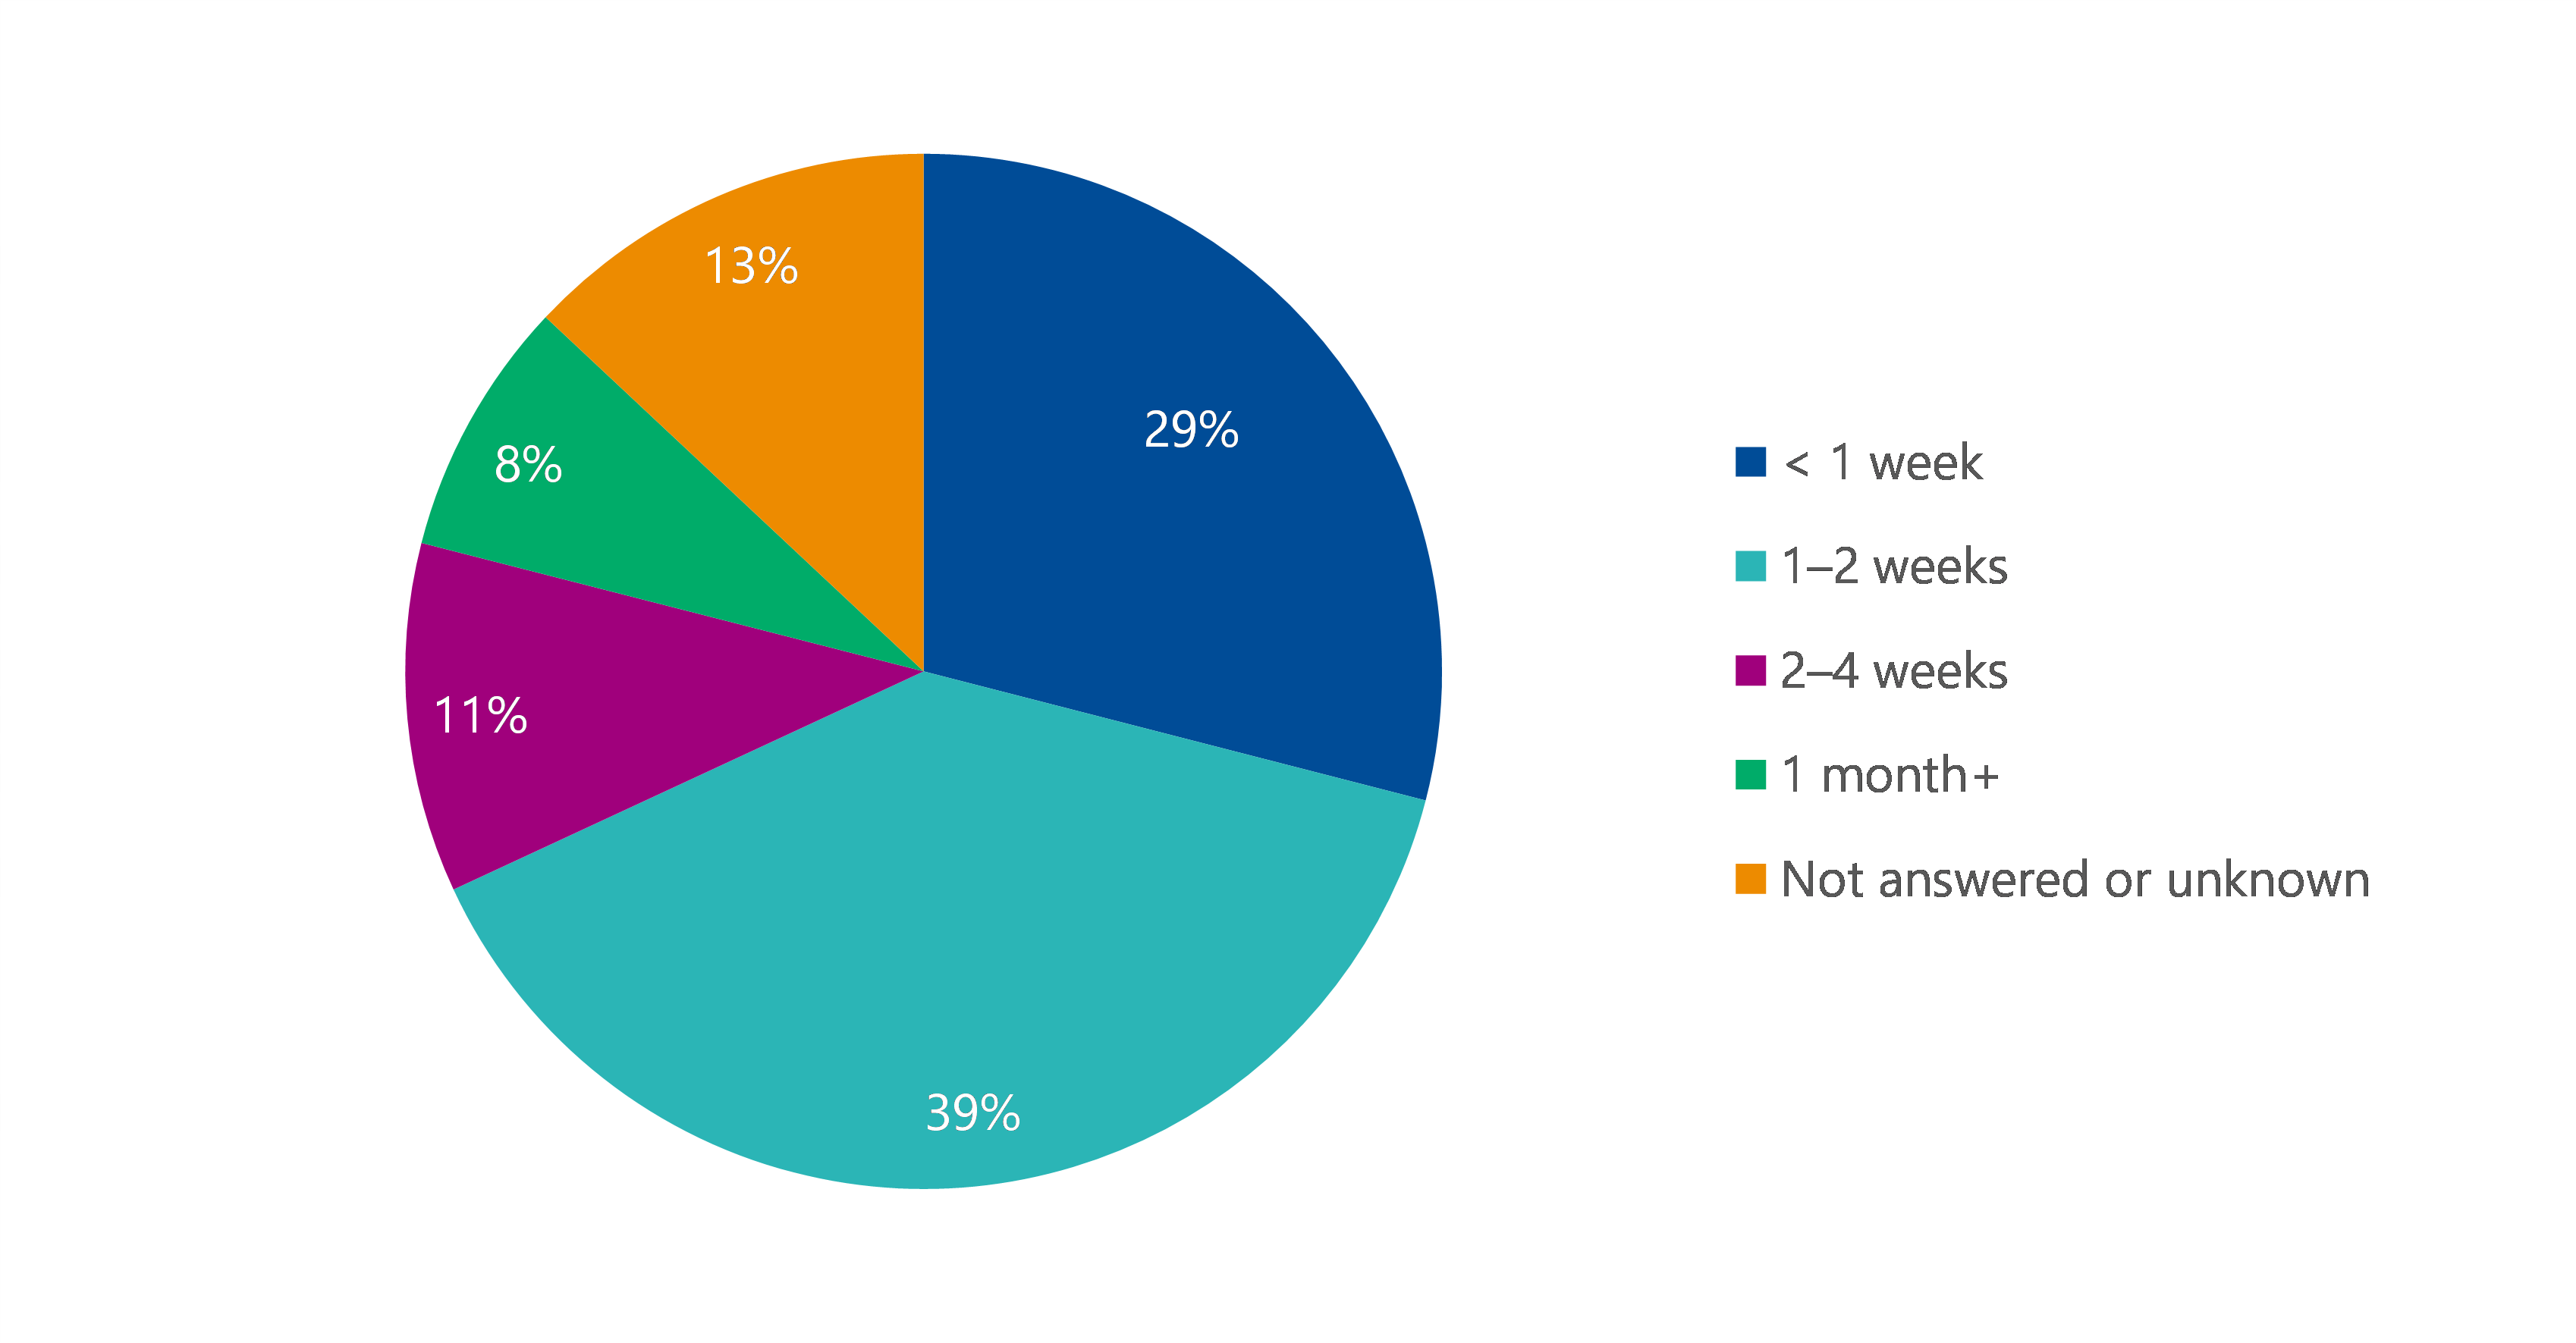 This is a pie chart showing that departments said it would take less than one week to provide raw BP3 data files for 29 per cent of measures, one to 2 weeks for 39 per cent, 2 to 4 weeks for 11 per cent and one month or more for 8 per cent. For 13 per cent of measures there was no answer or the time was unknown.